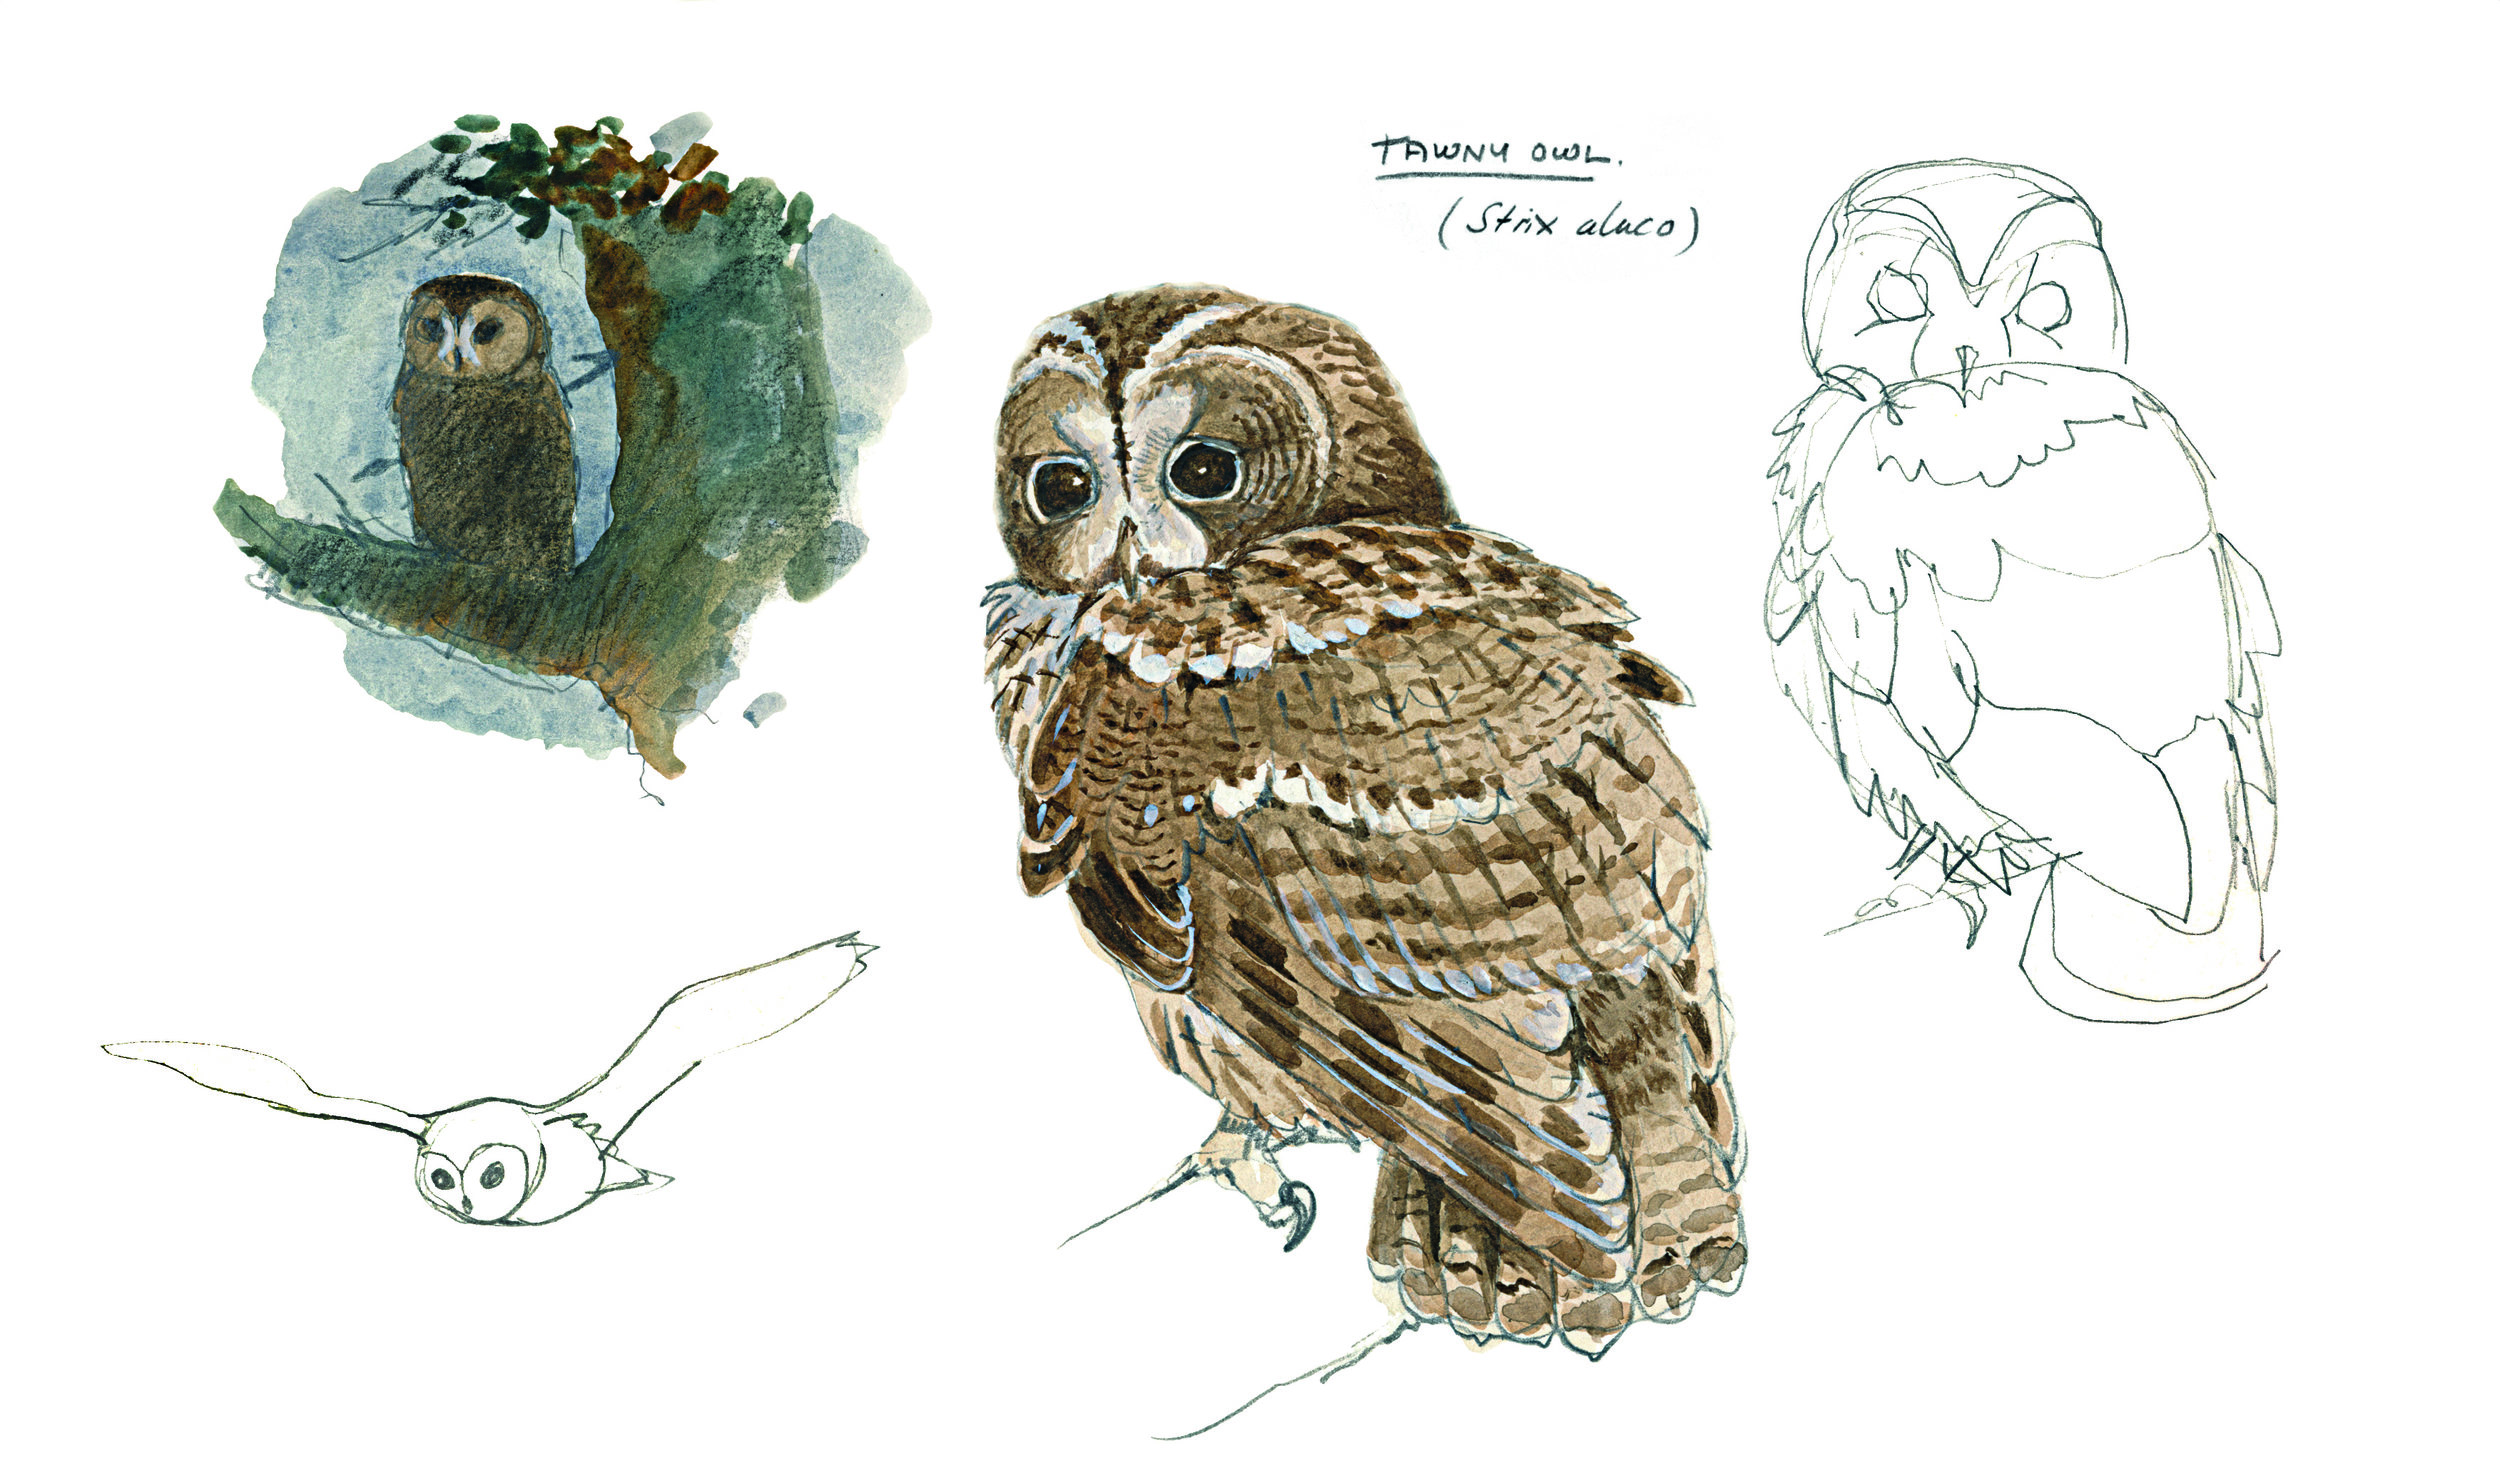 TAWNY OWL (Strix aluco) - Chouette hulotte — wildechoes